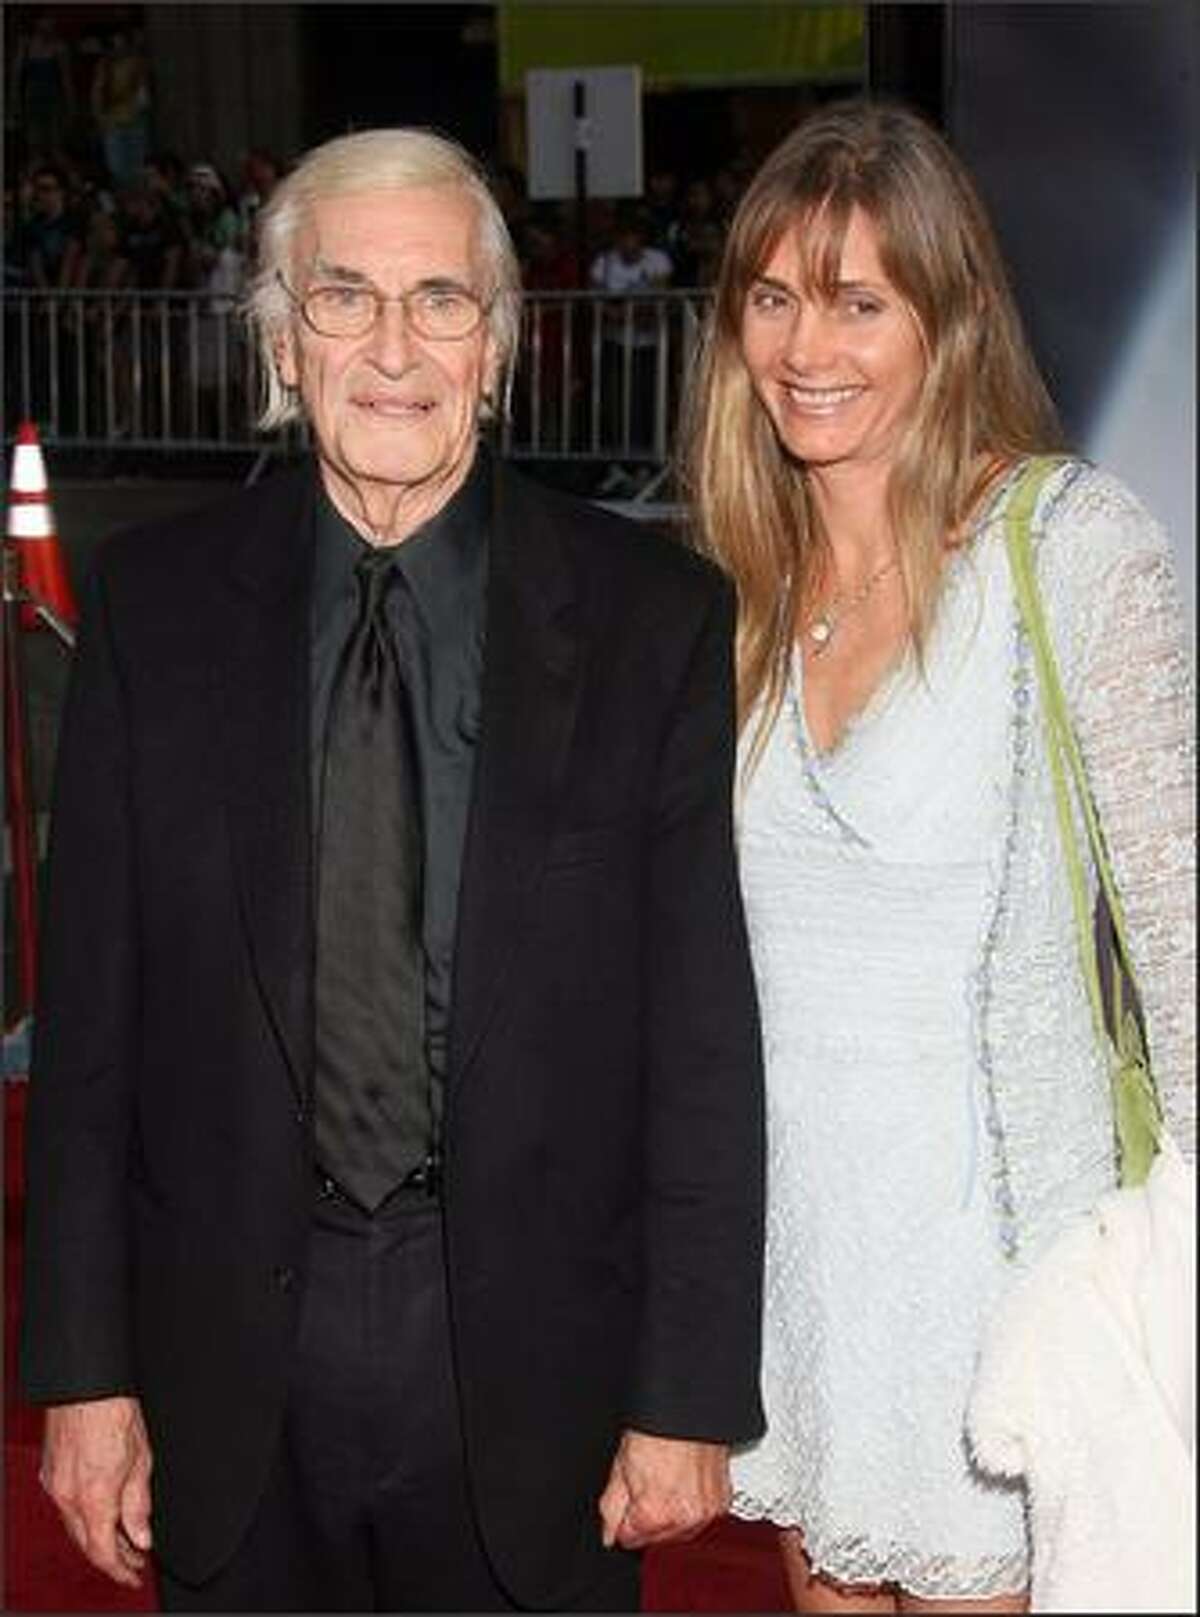 Actor Martin Landau and Gretchen Becker arrive for the premiere of "The X Files: I Want to Believe" at the Chinese theater in Los Angeles.